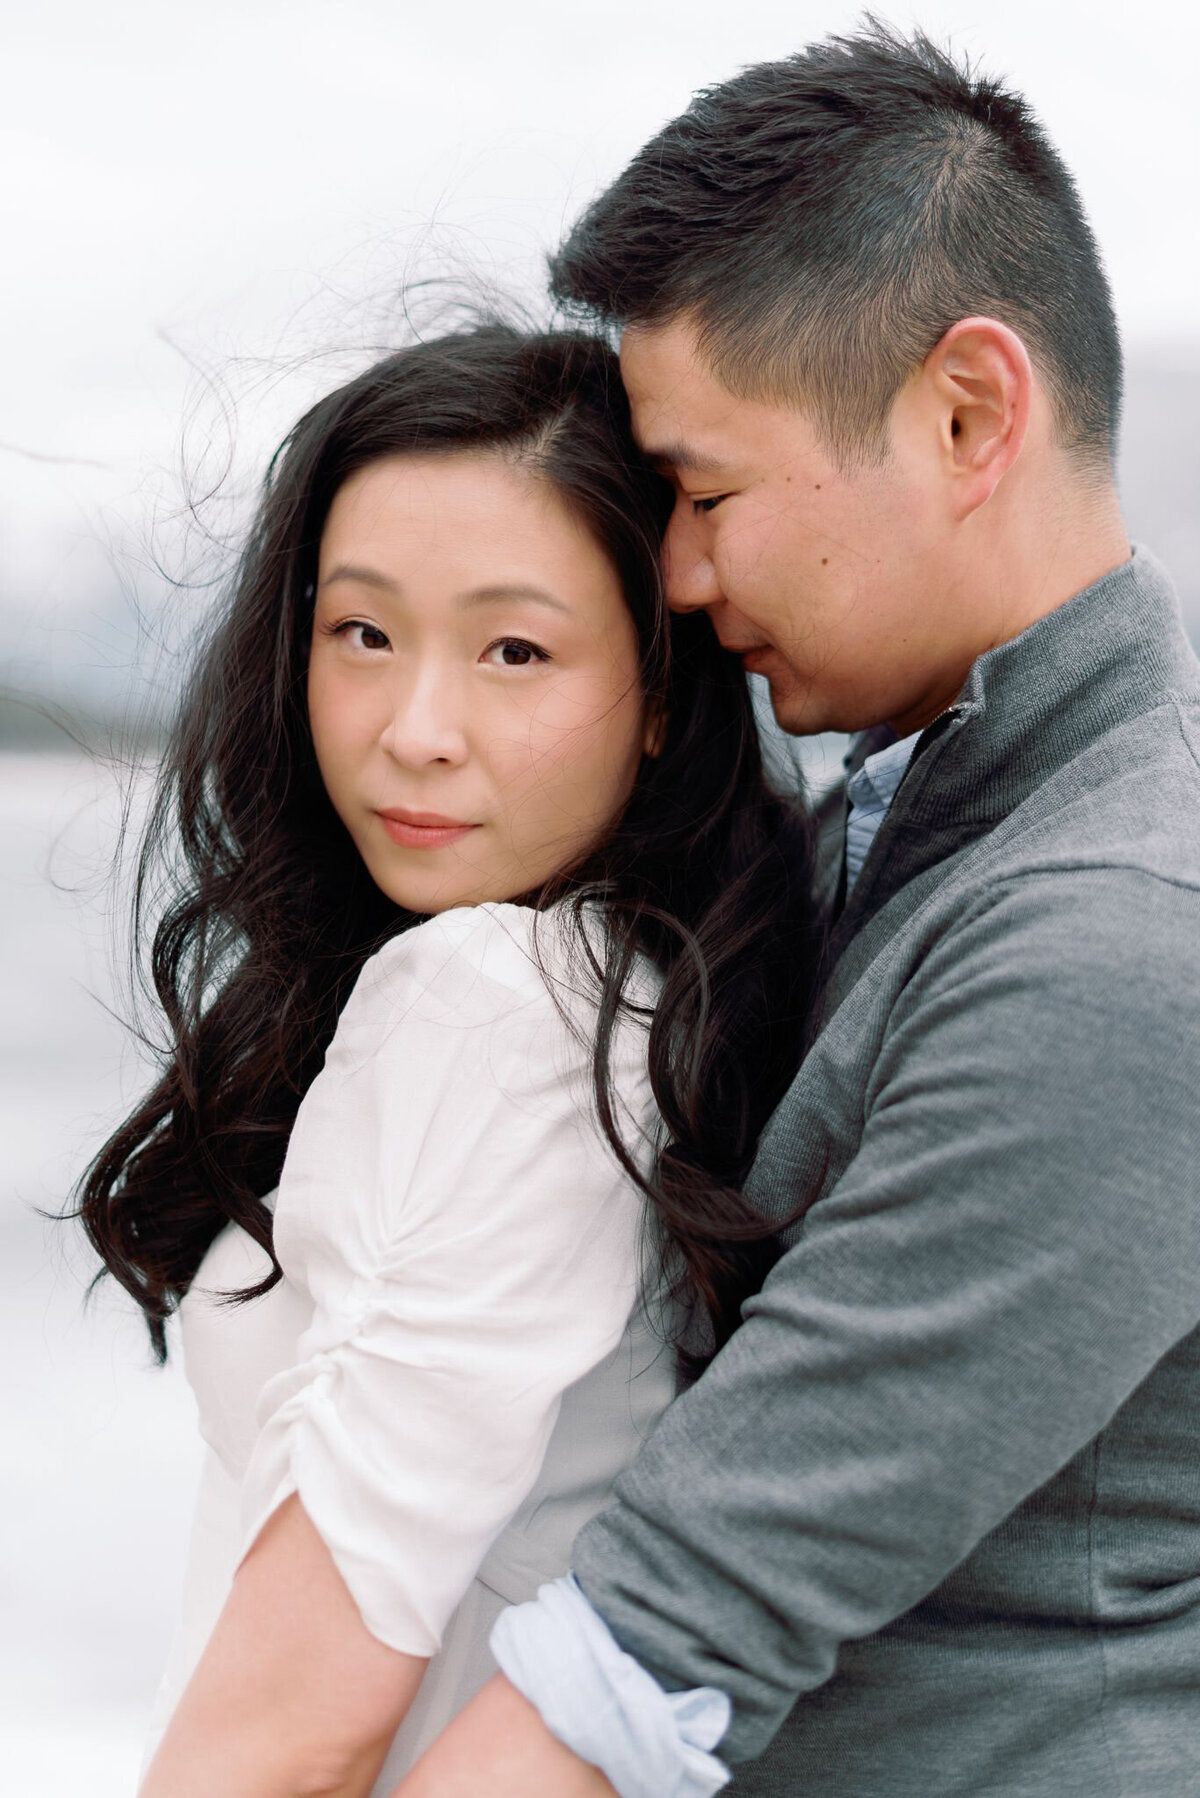 Engaged couple captured by Kaity Body Photography, elegant film inspired wedding photographer in Calgary, Alberta. Featured on the Bronte Bride Vendor Guide.